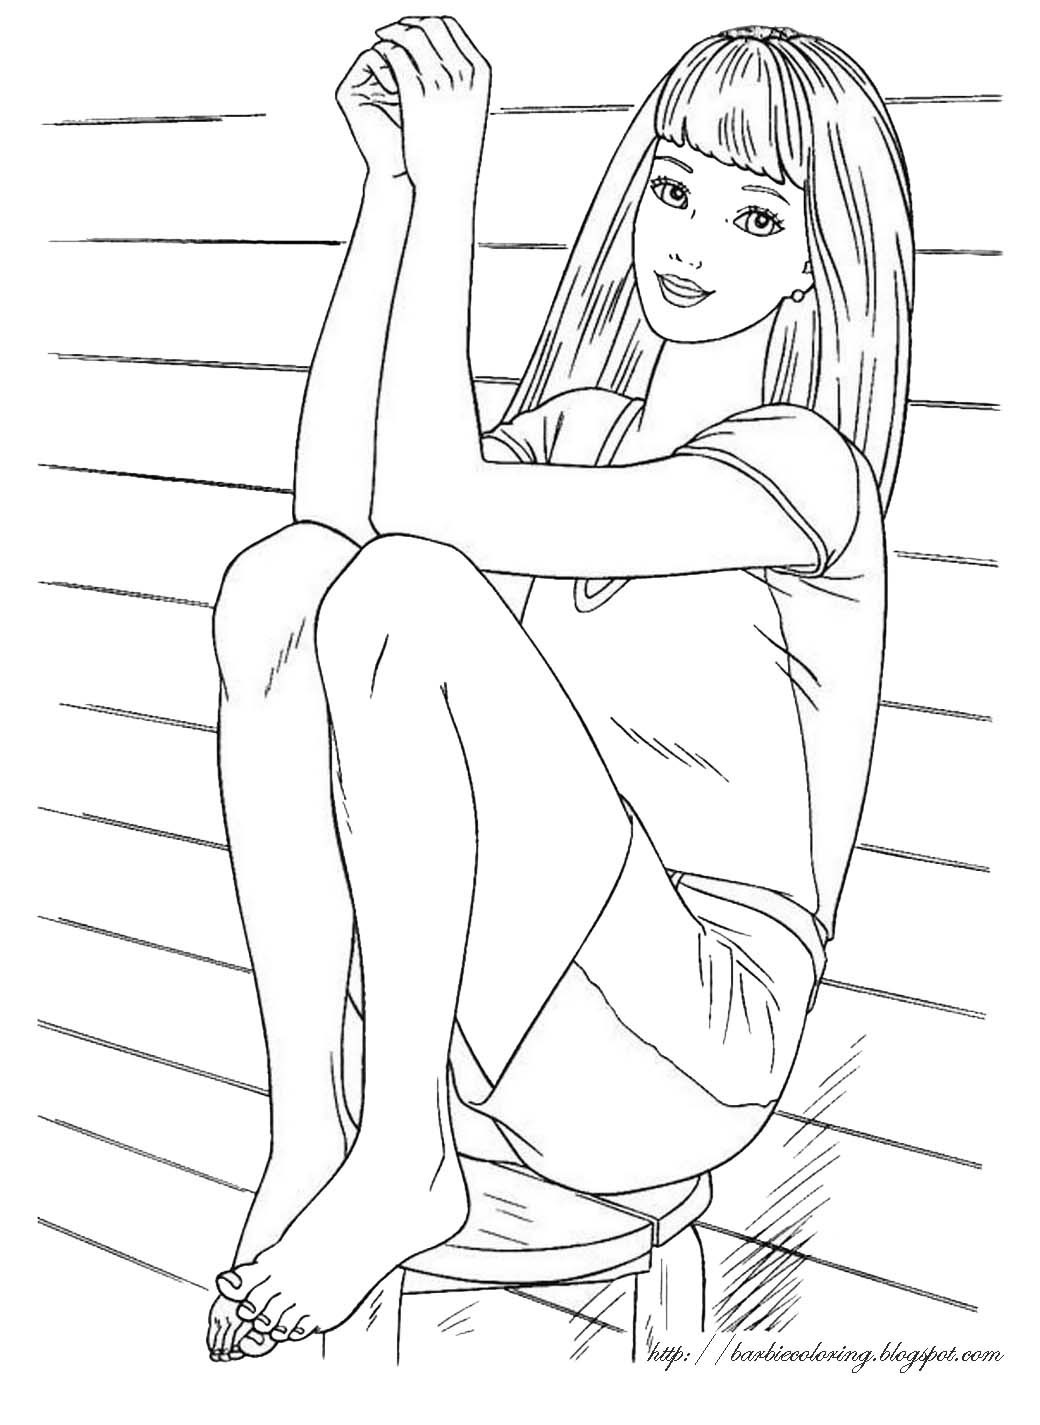 Barbie Doll Coloring Pages
 BARBIE COLORING PAGES TWO MORE COLORING PICTURES OF BARBIE